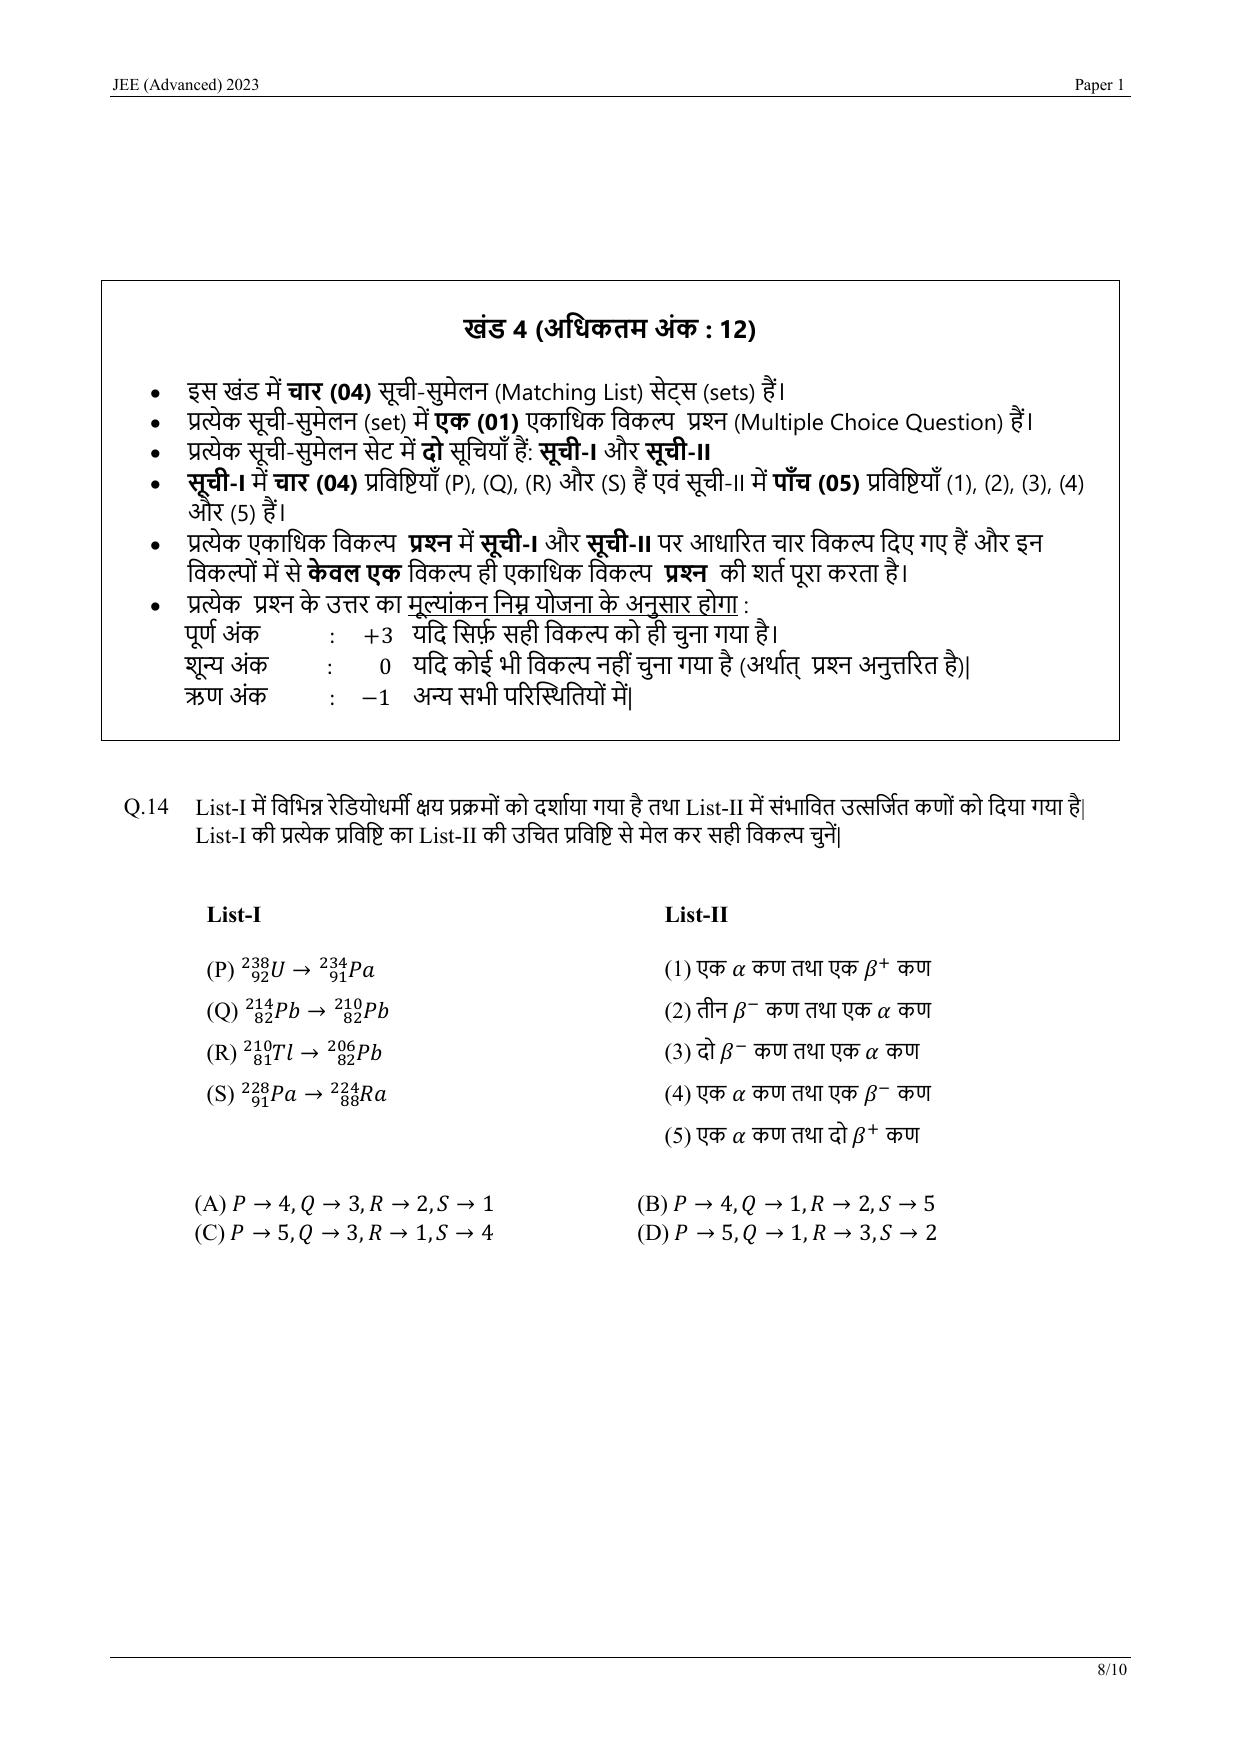 JEE Advanced 2023 Question Paper 1 (Hindi) - Page 18